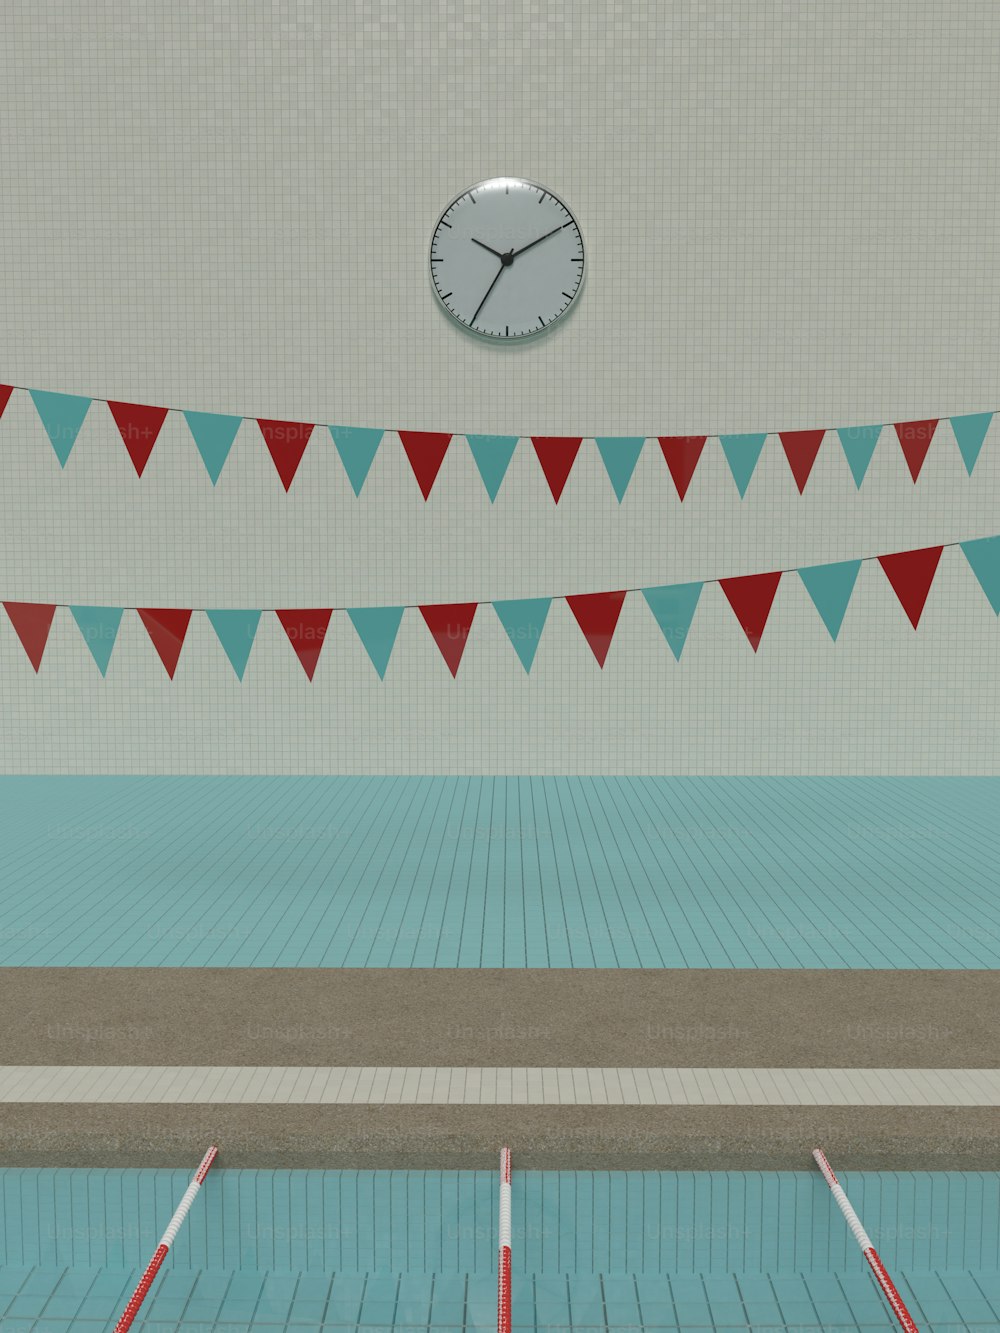 a swimming pool with a clock on the wall